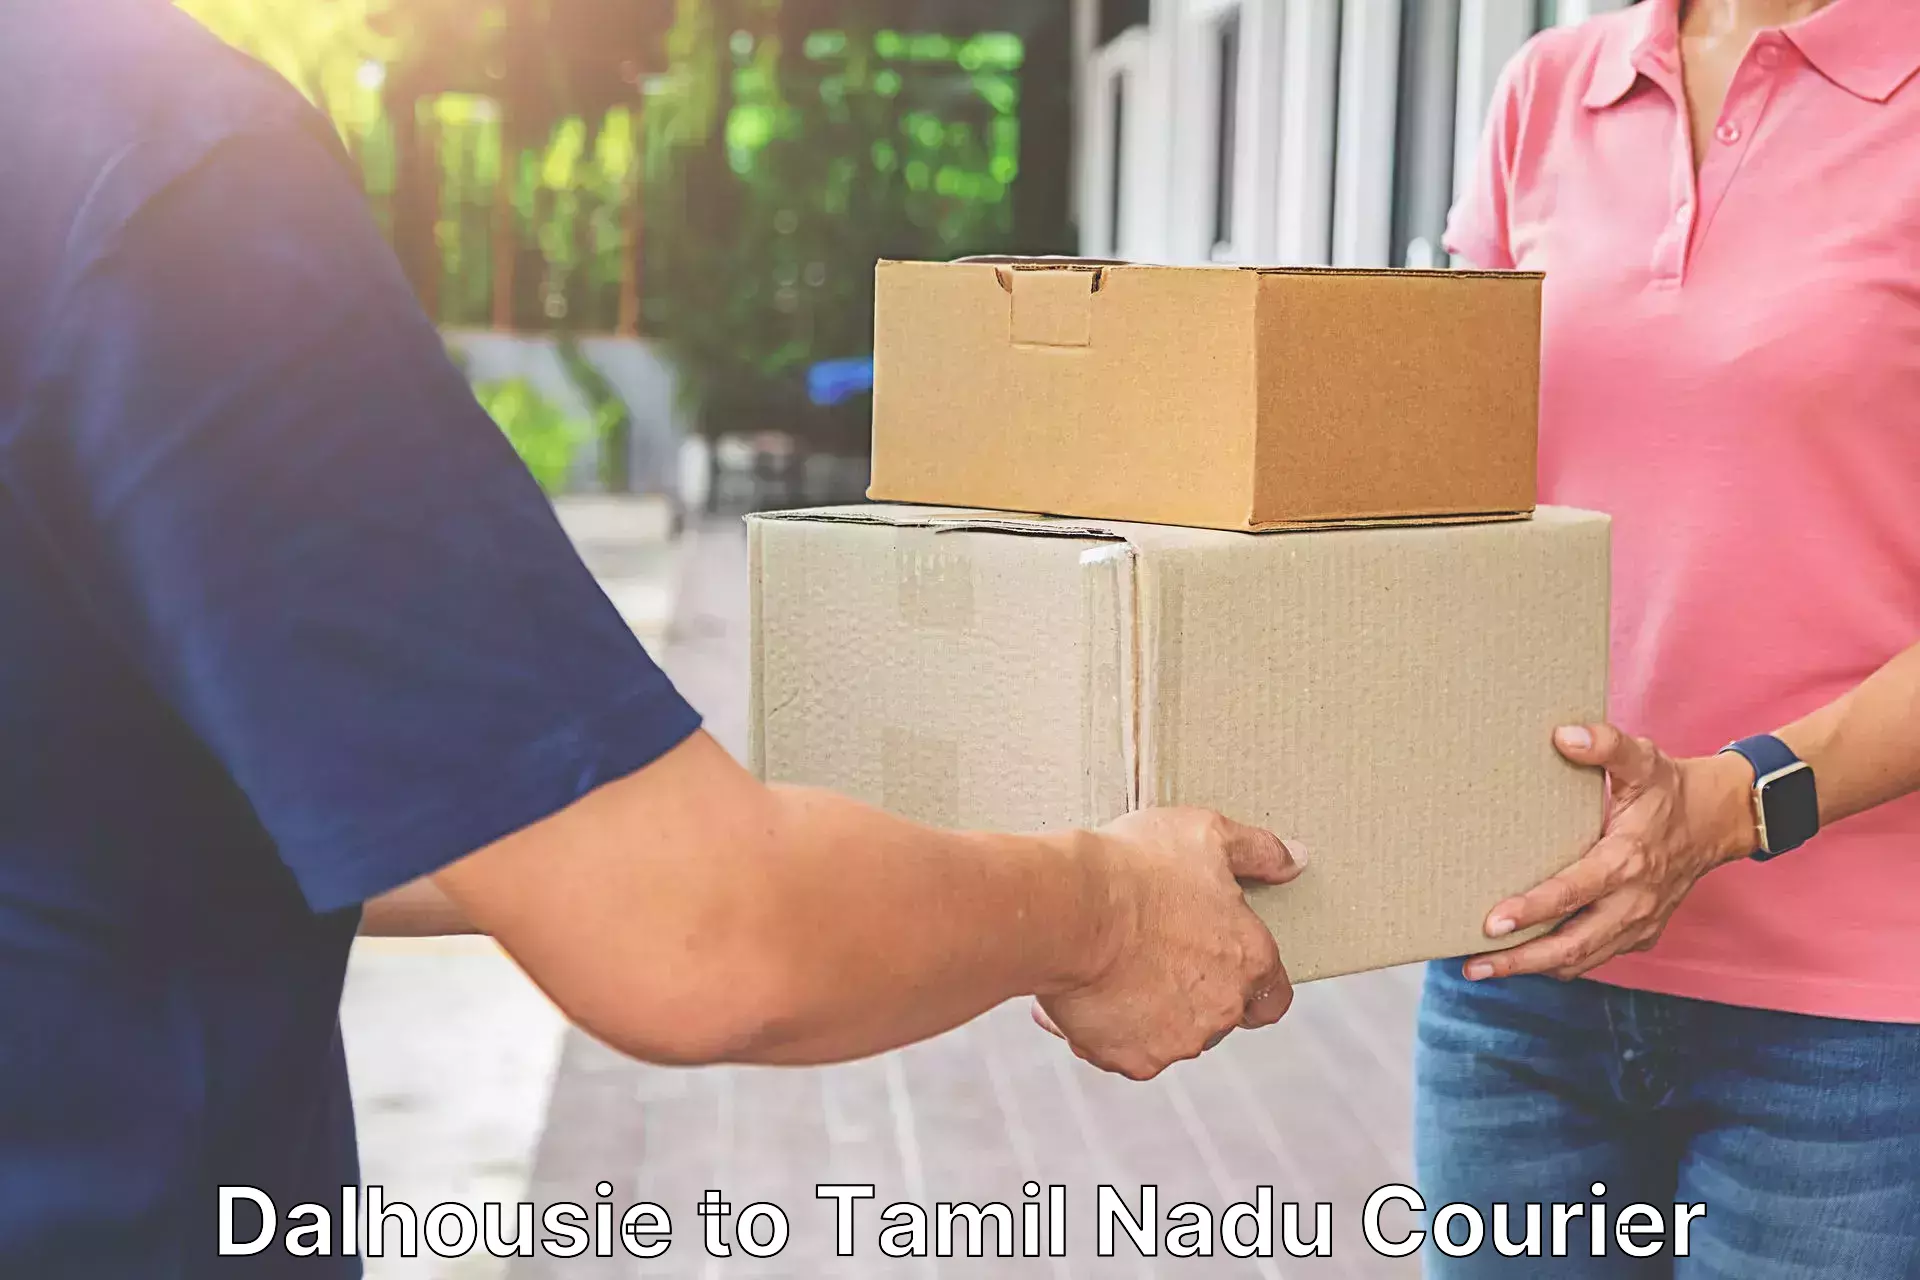 Global shipping solutions Dalhousie to Tamil Nadu